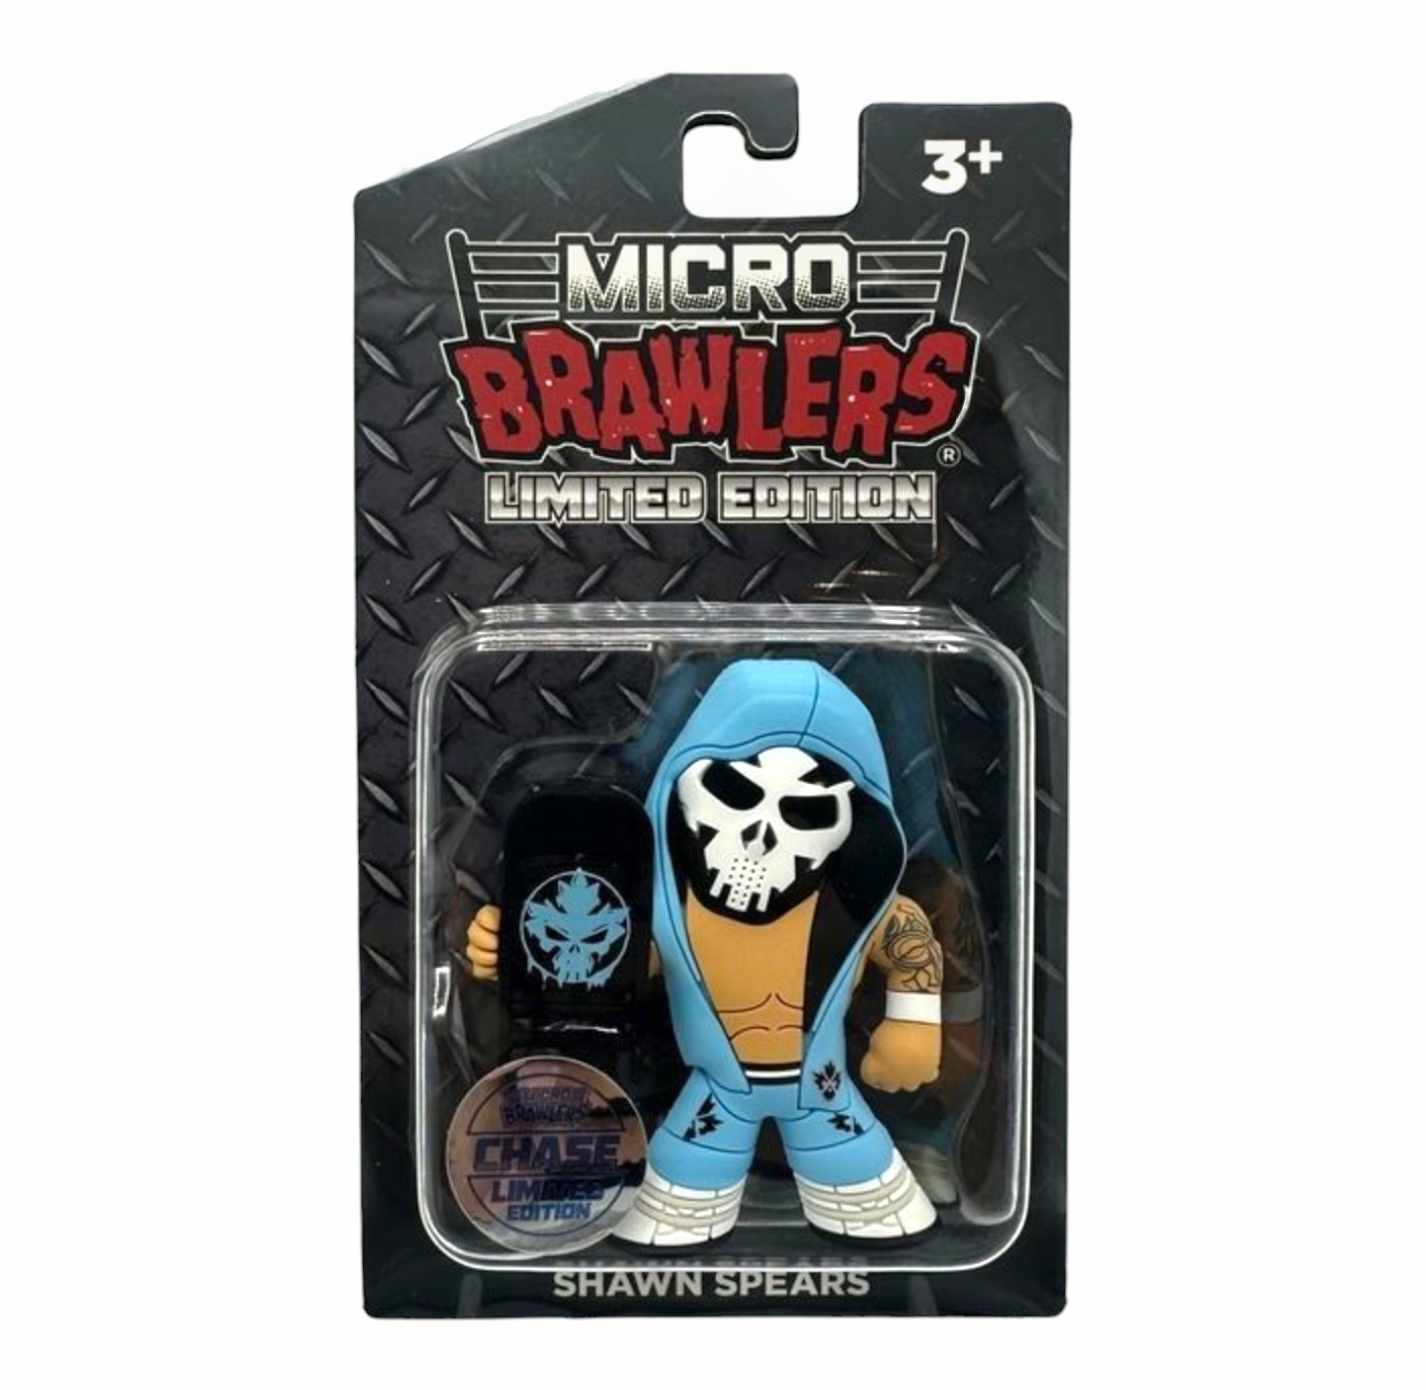 2023 Pro Wrestling Tees Limited Edition Micro Brawler Shawn Spears [Chase]